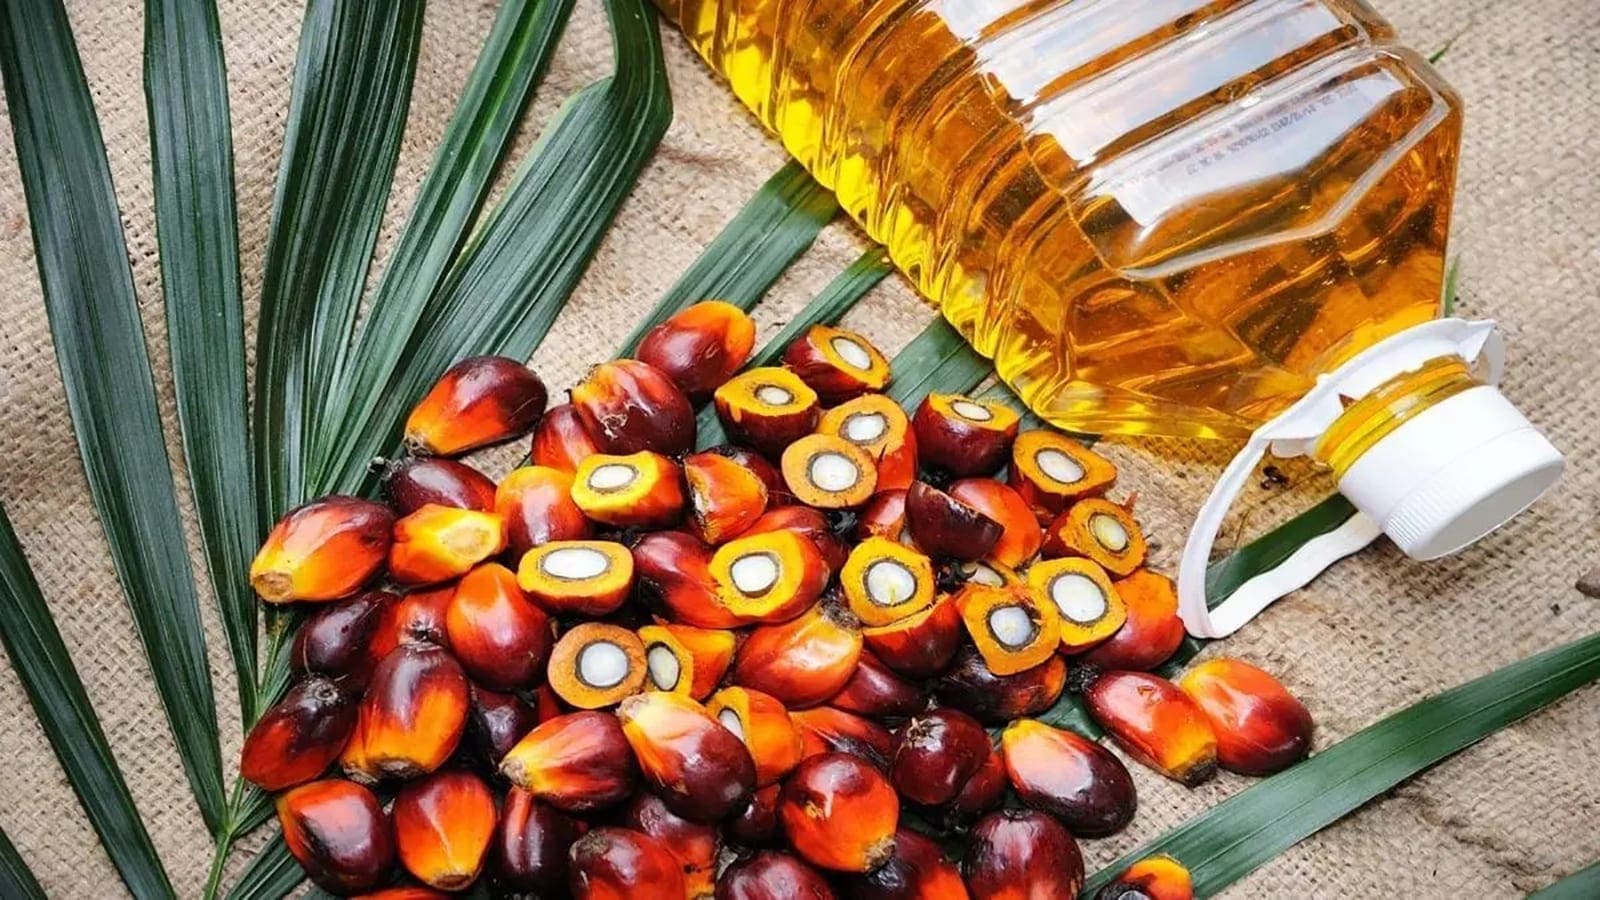 Nigeria’s palm oil production to rise on back of private, public sector investment efforts